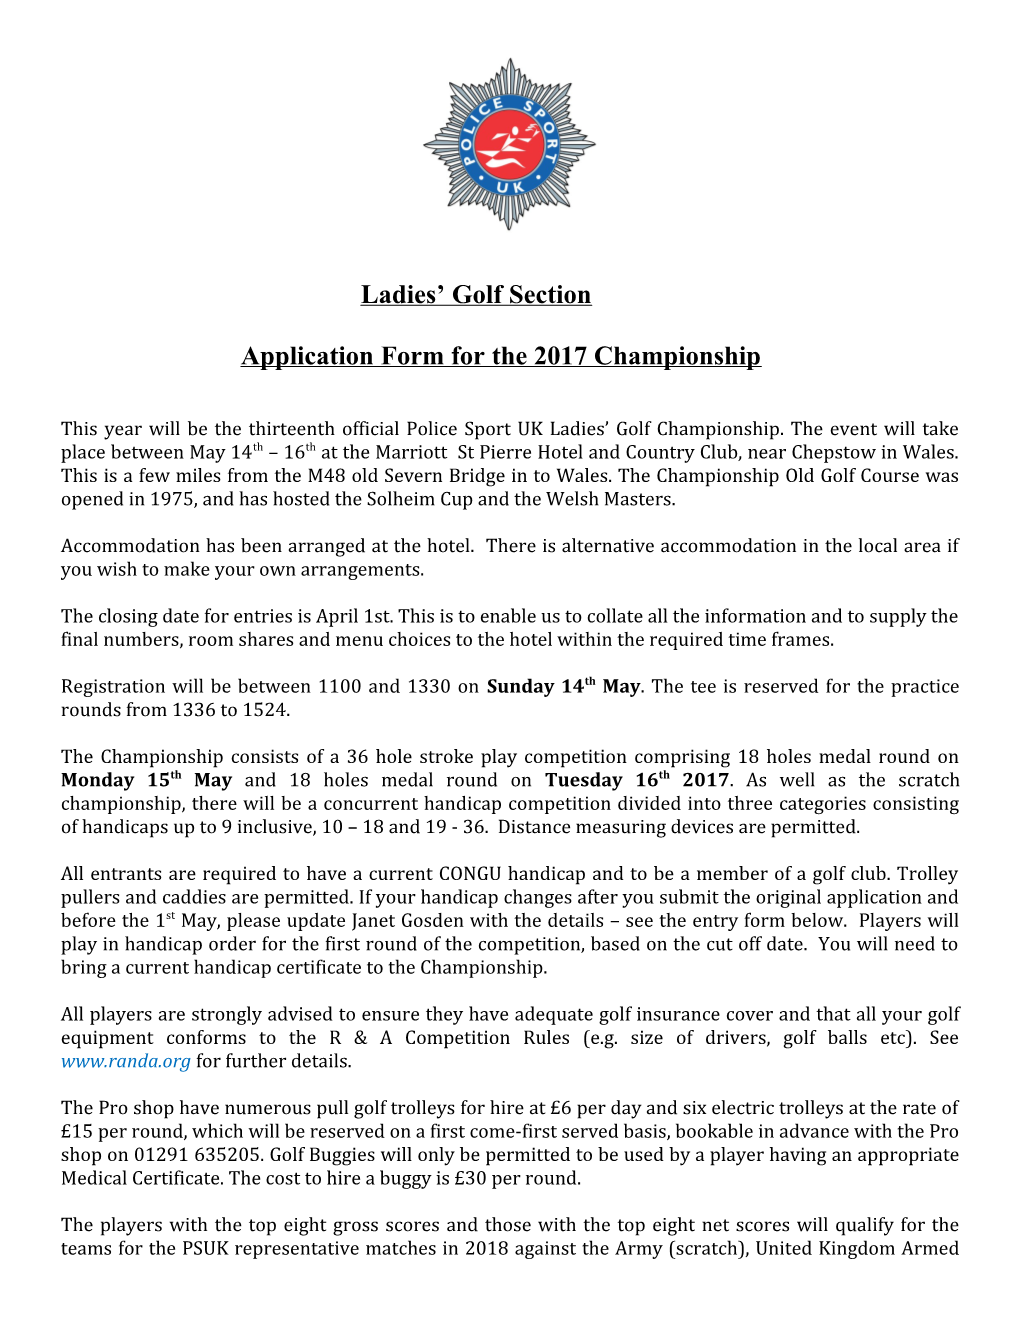 Application Form for the 2017Championship